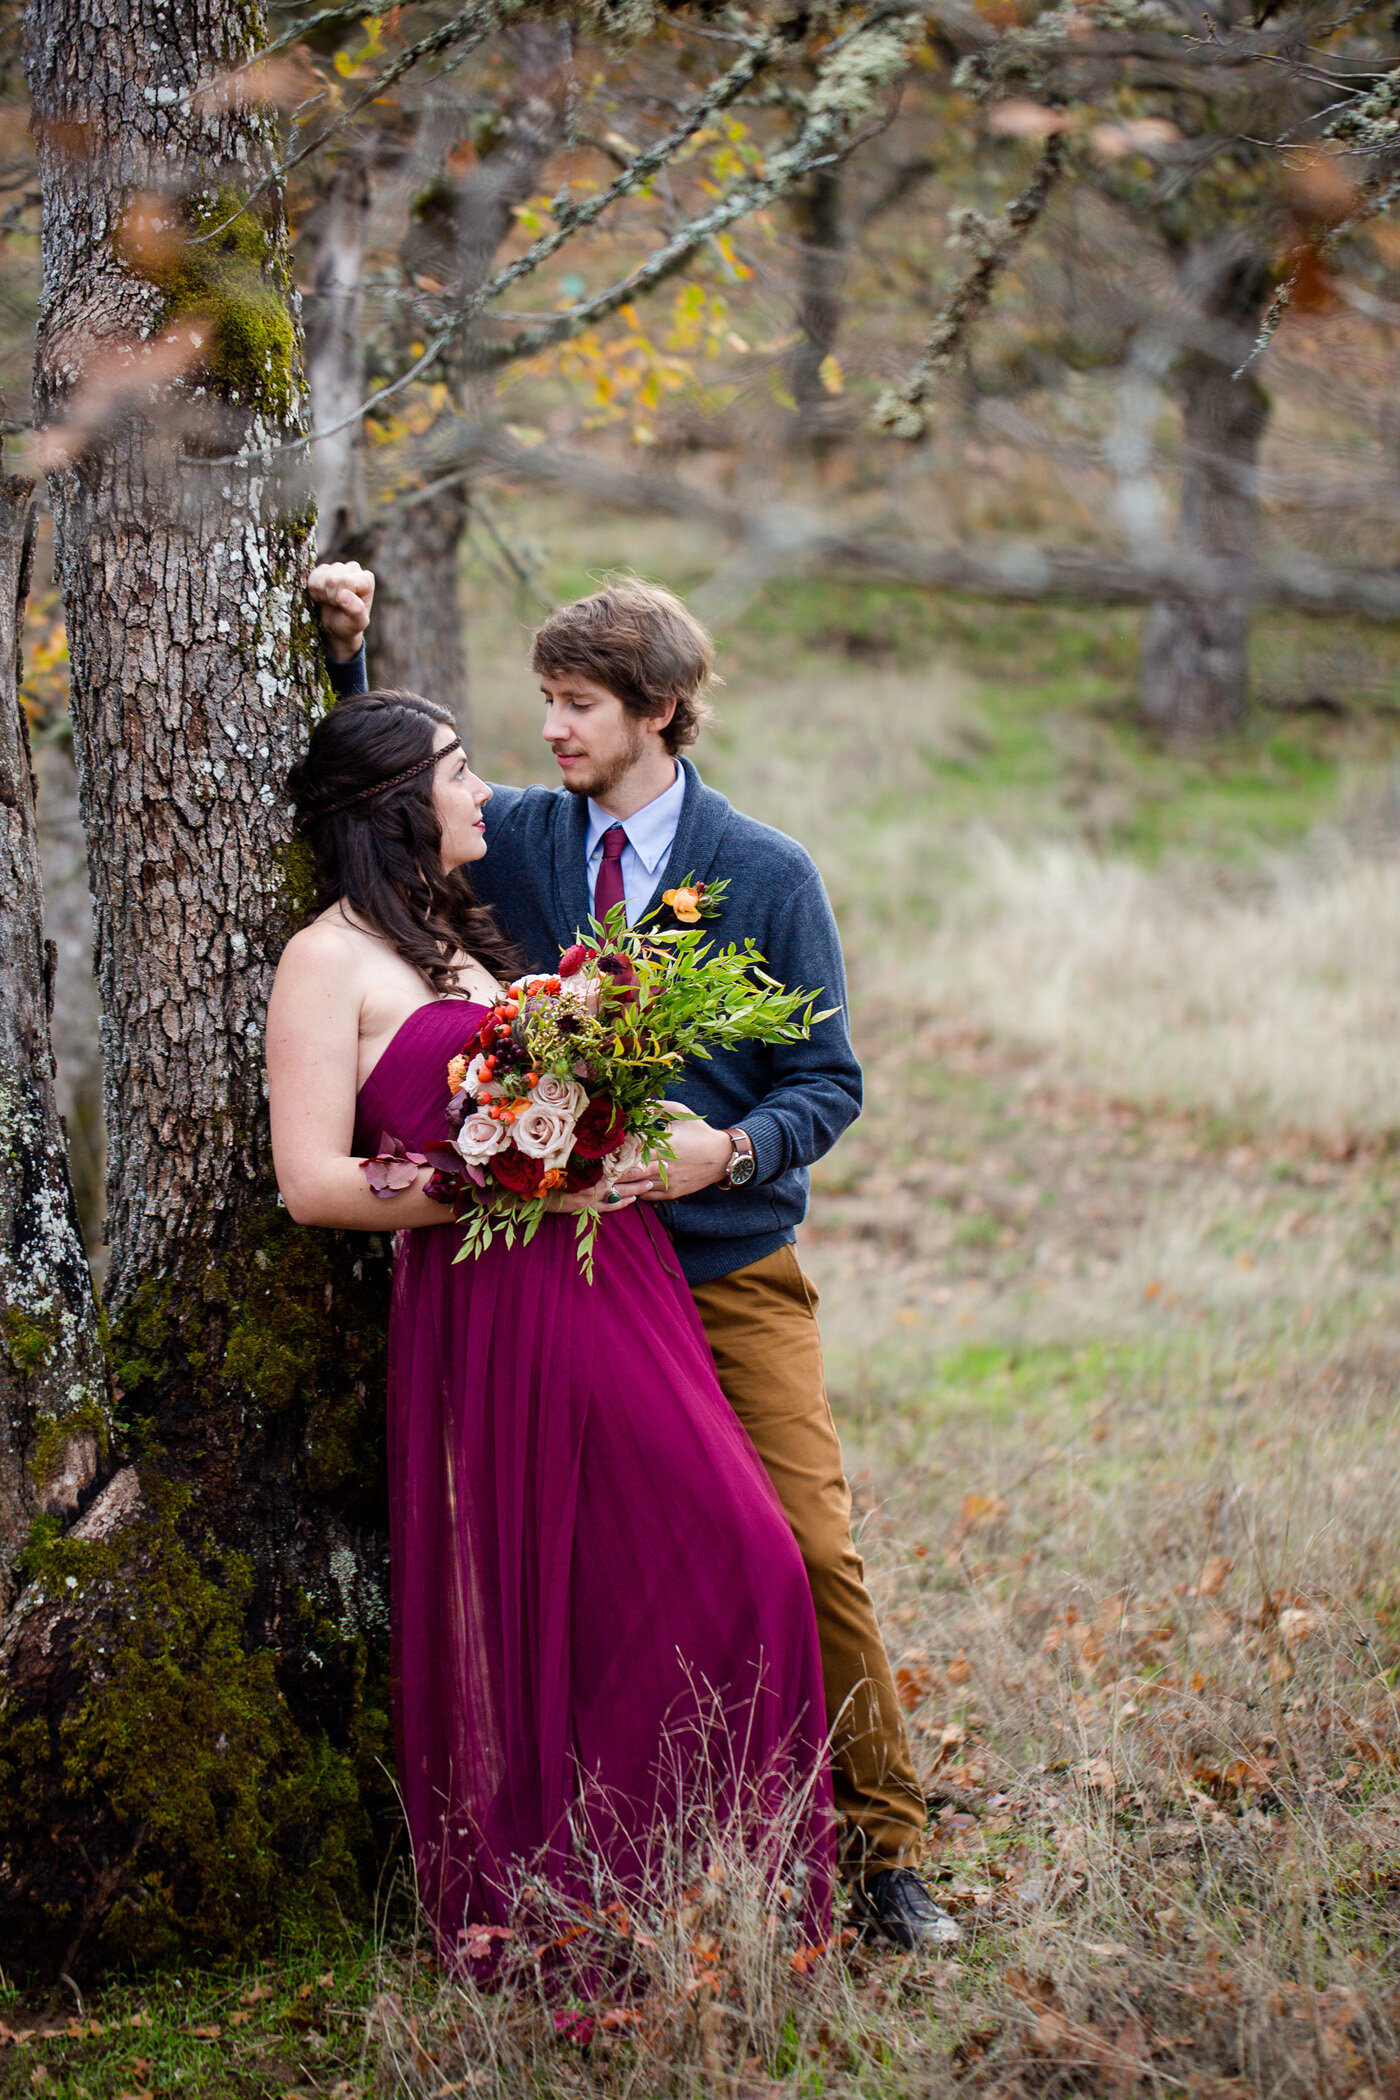 Eloping couple in a beautiful and wild PNW setting in Washington state